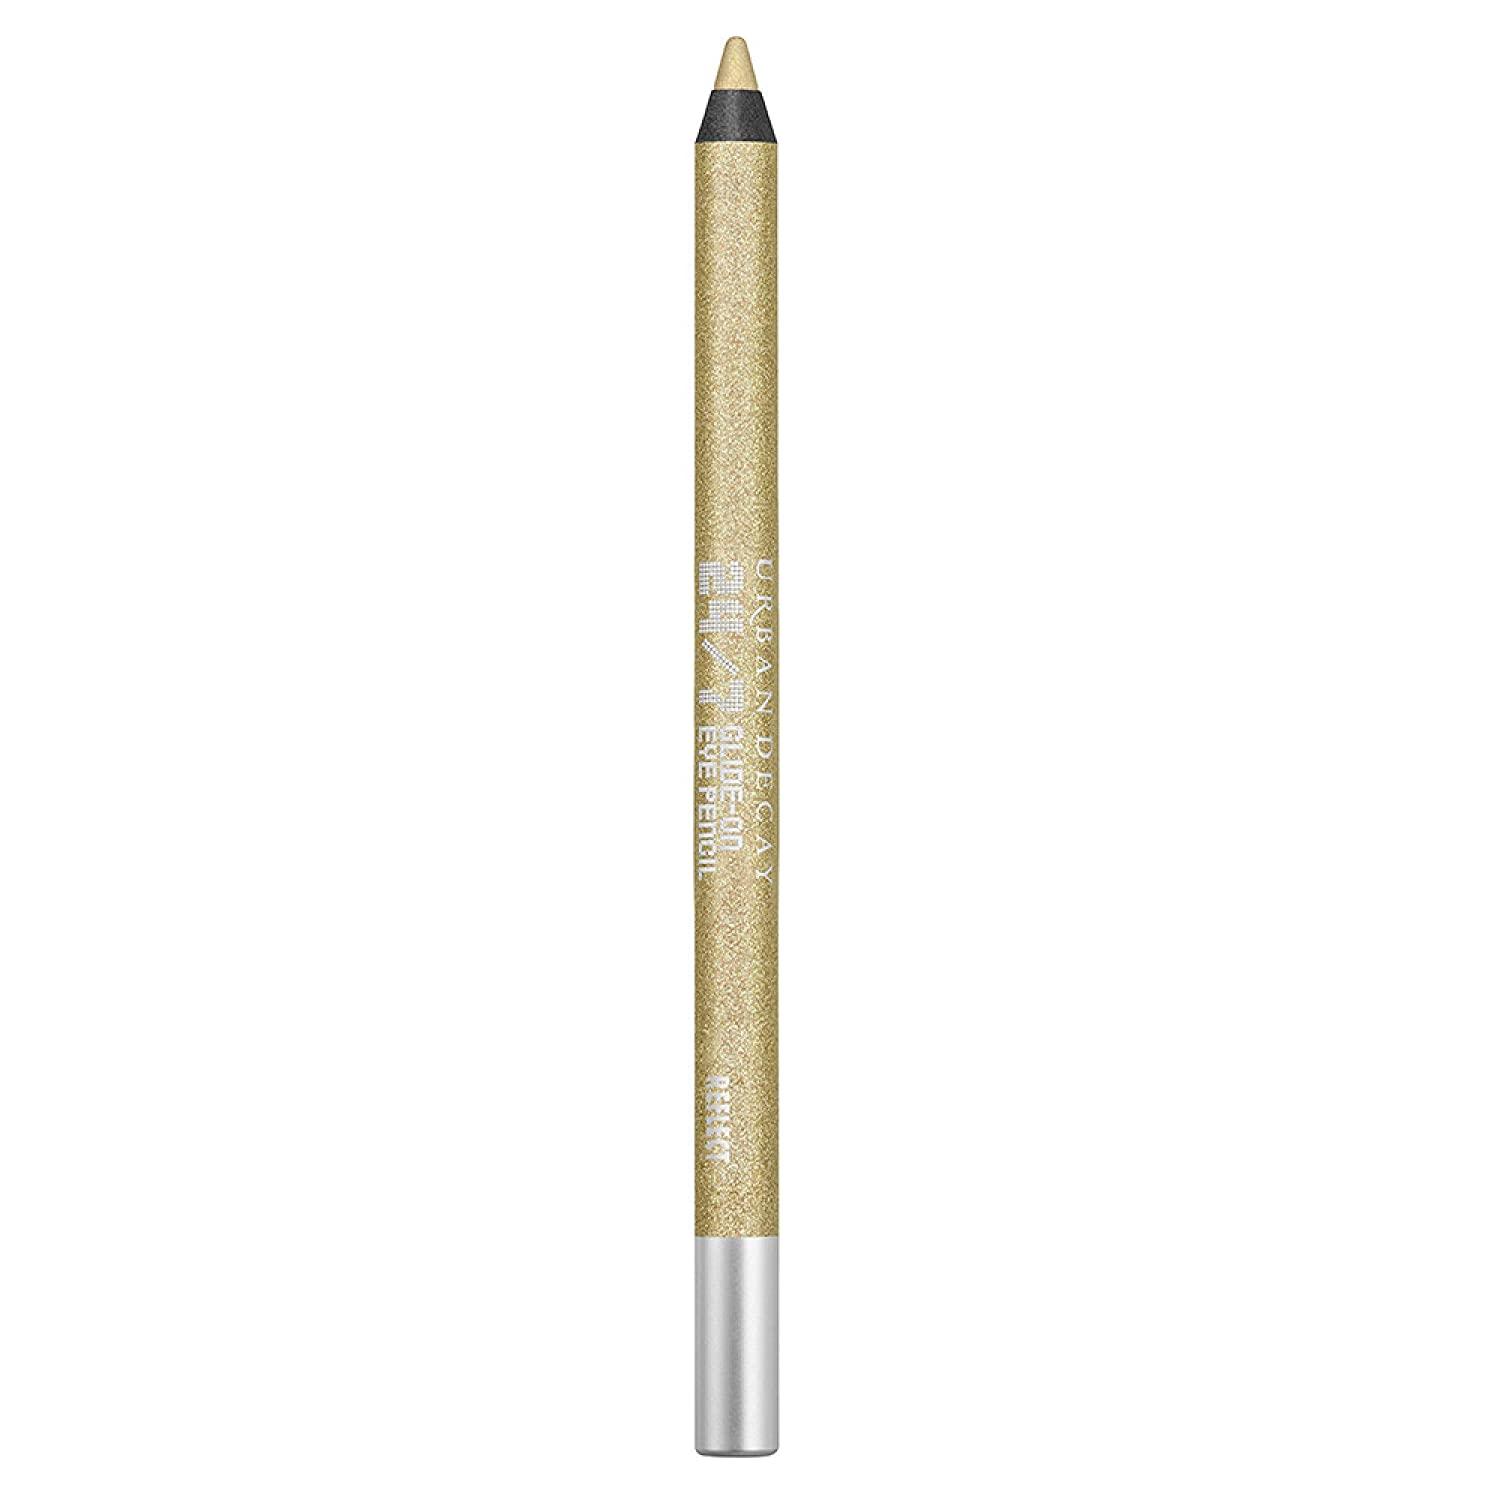 Urban Decay Wired 24/7 Glide-On Eye Pencil Reflect